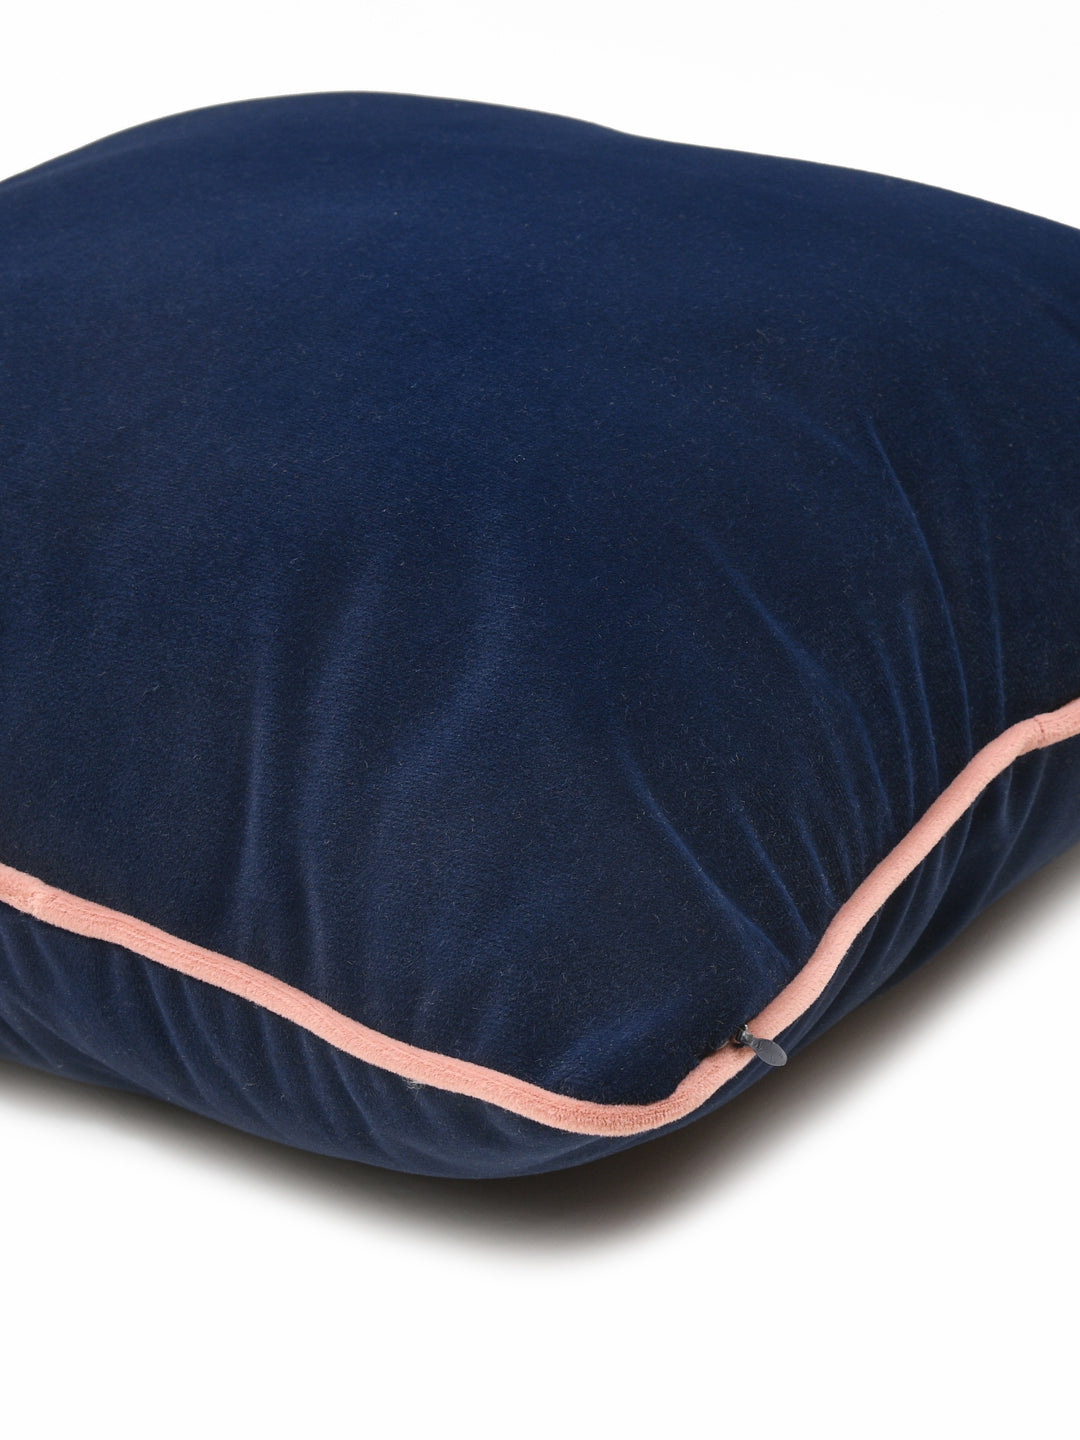 Velvet Cushion Covers; Set of 3; Blue With Pink Piping